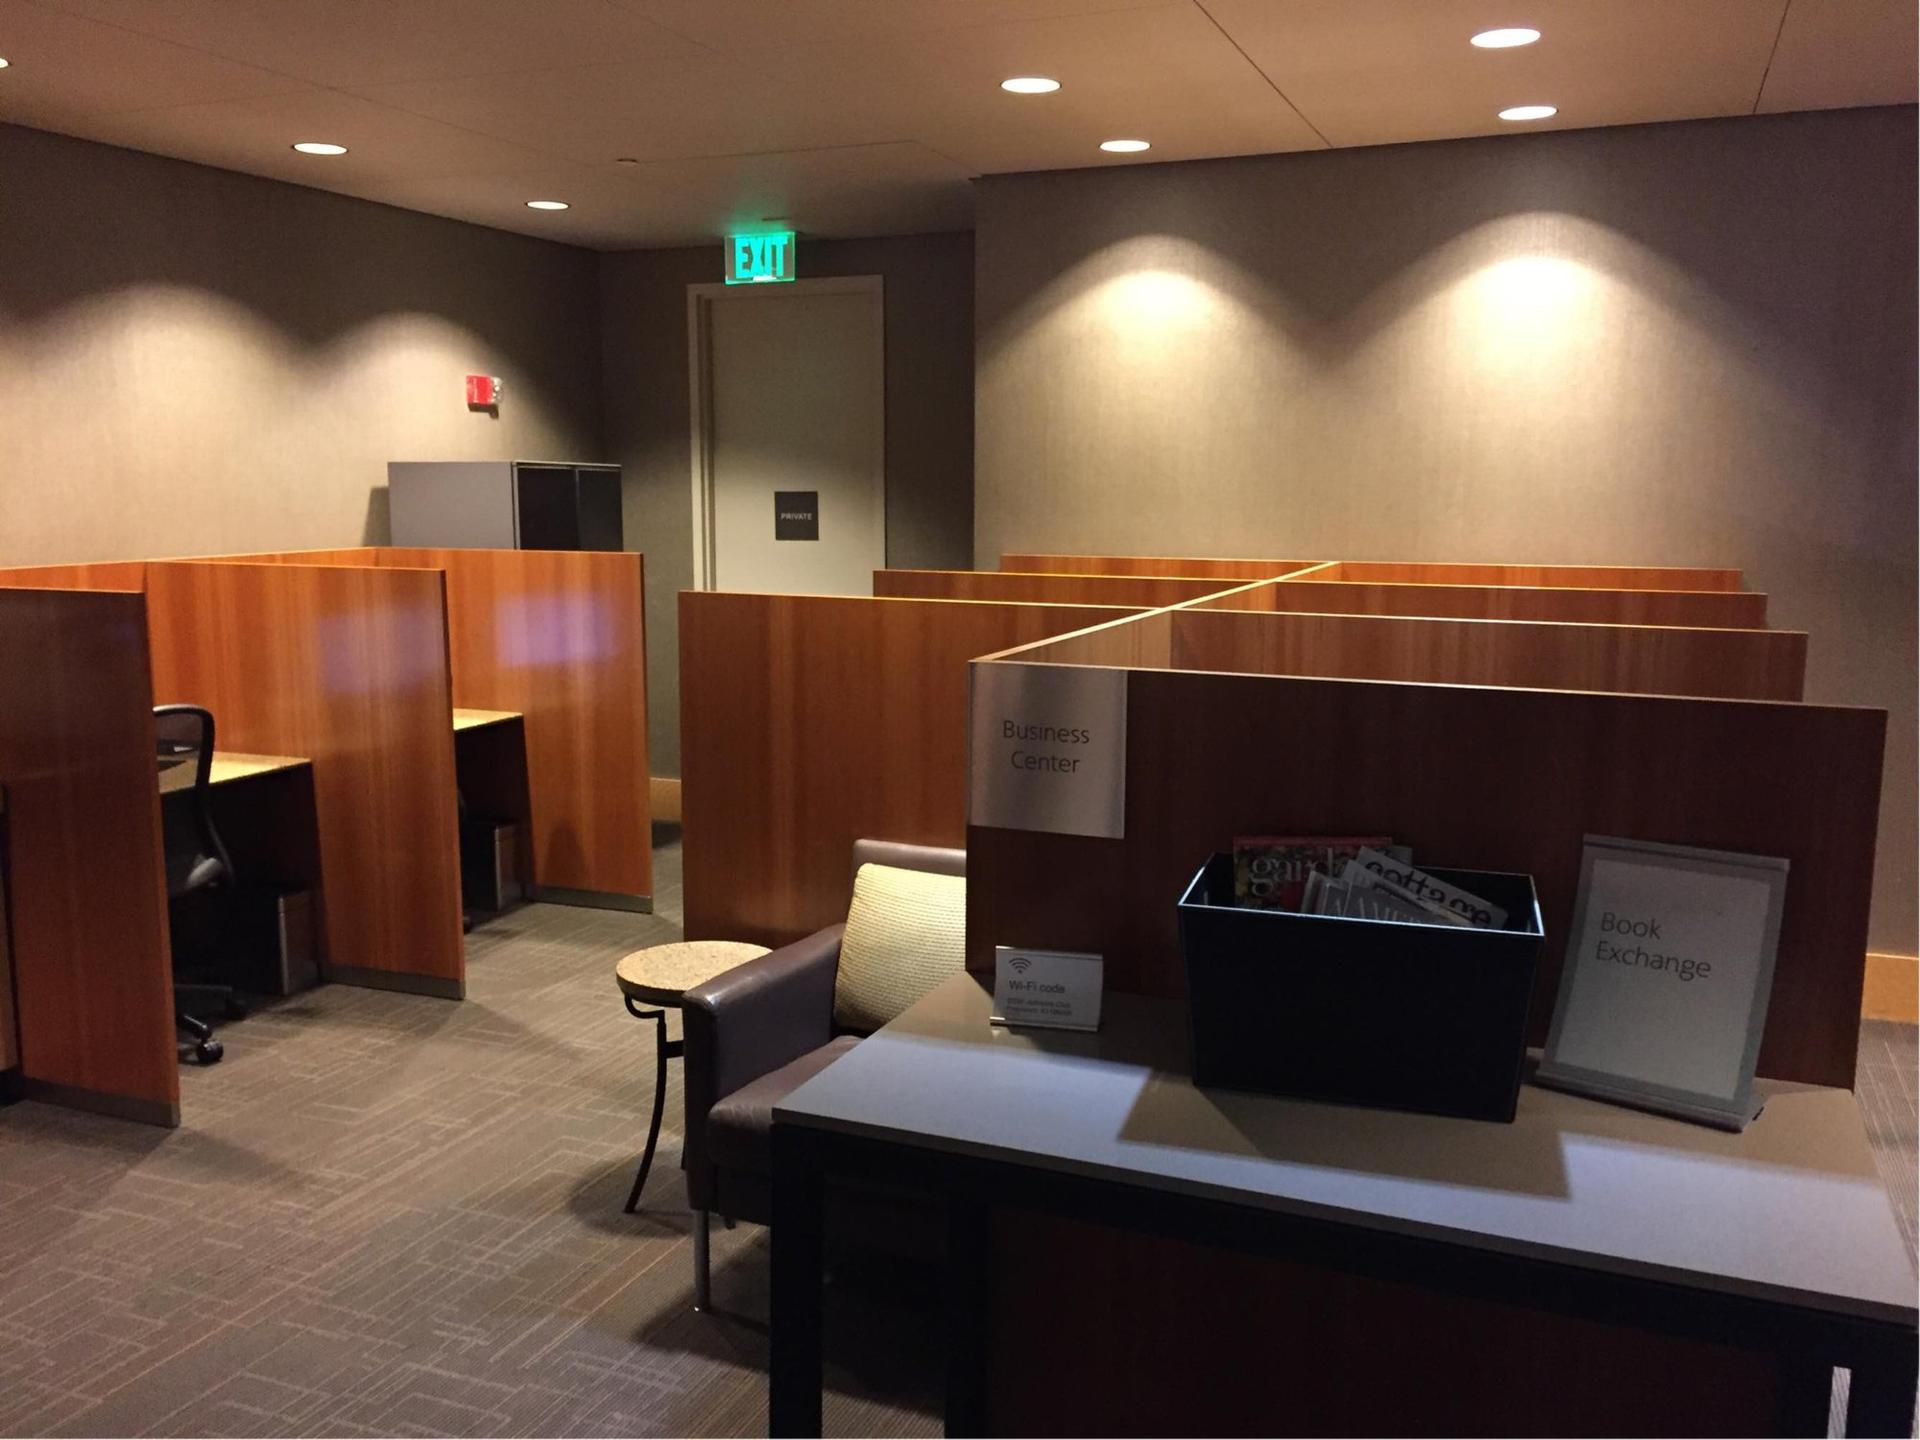 American Airlines Admirals Club image 8 of 14